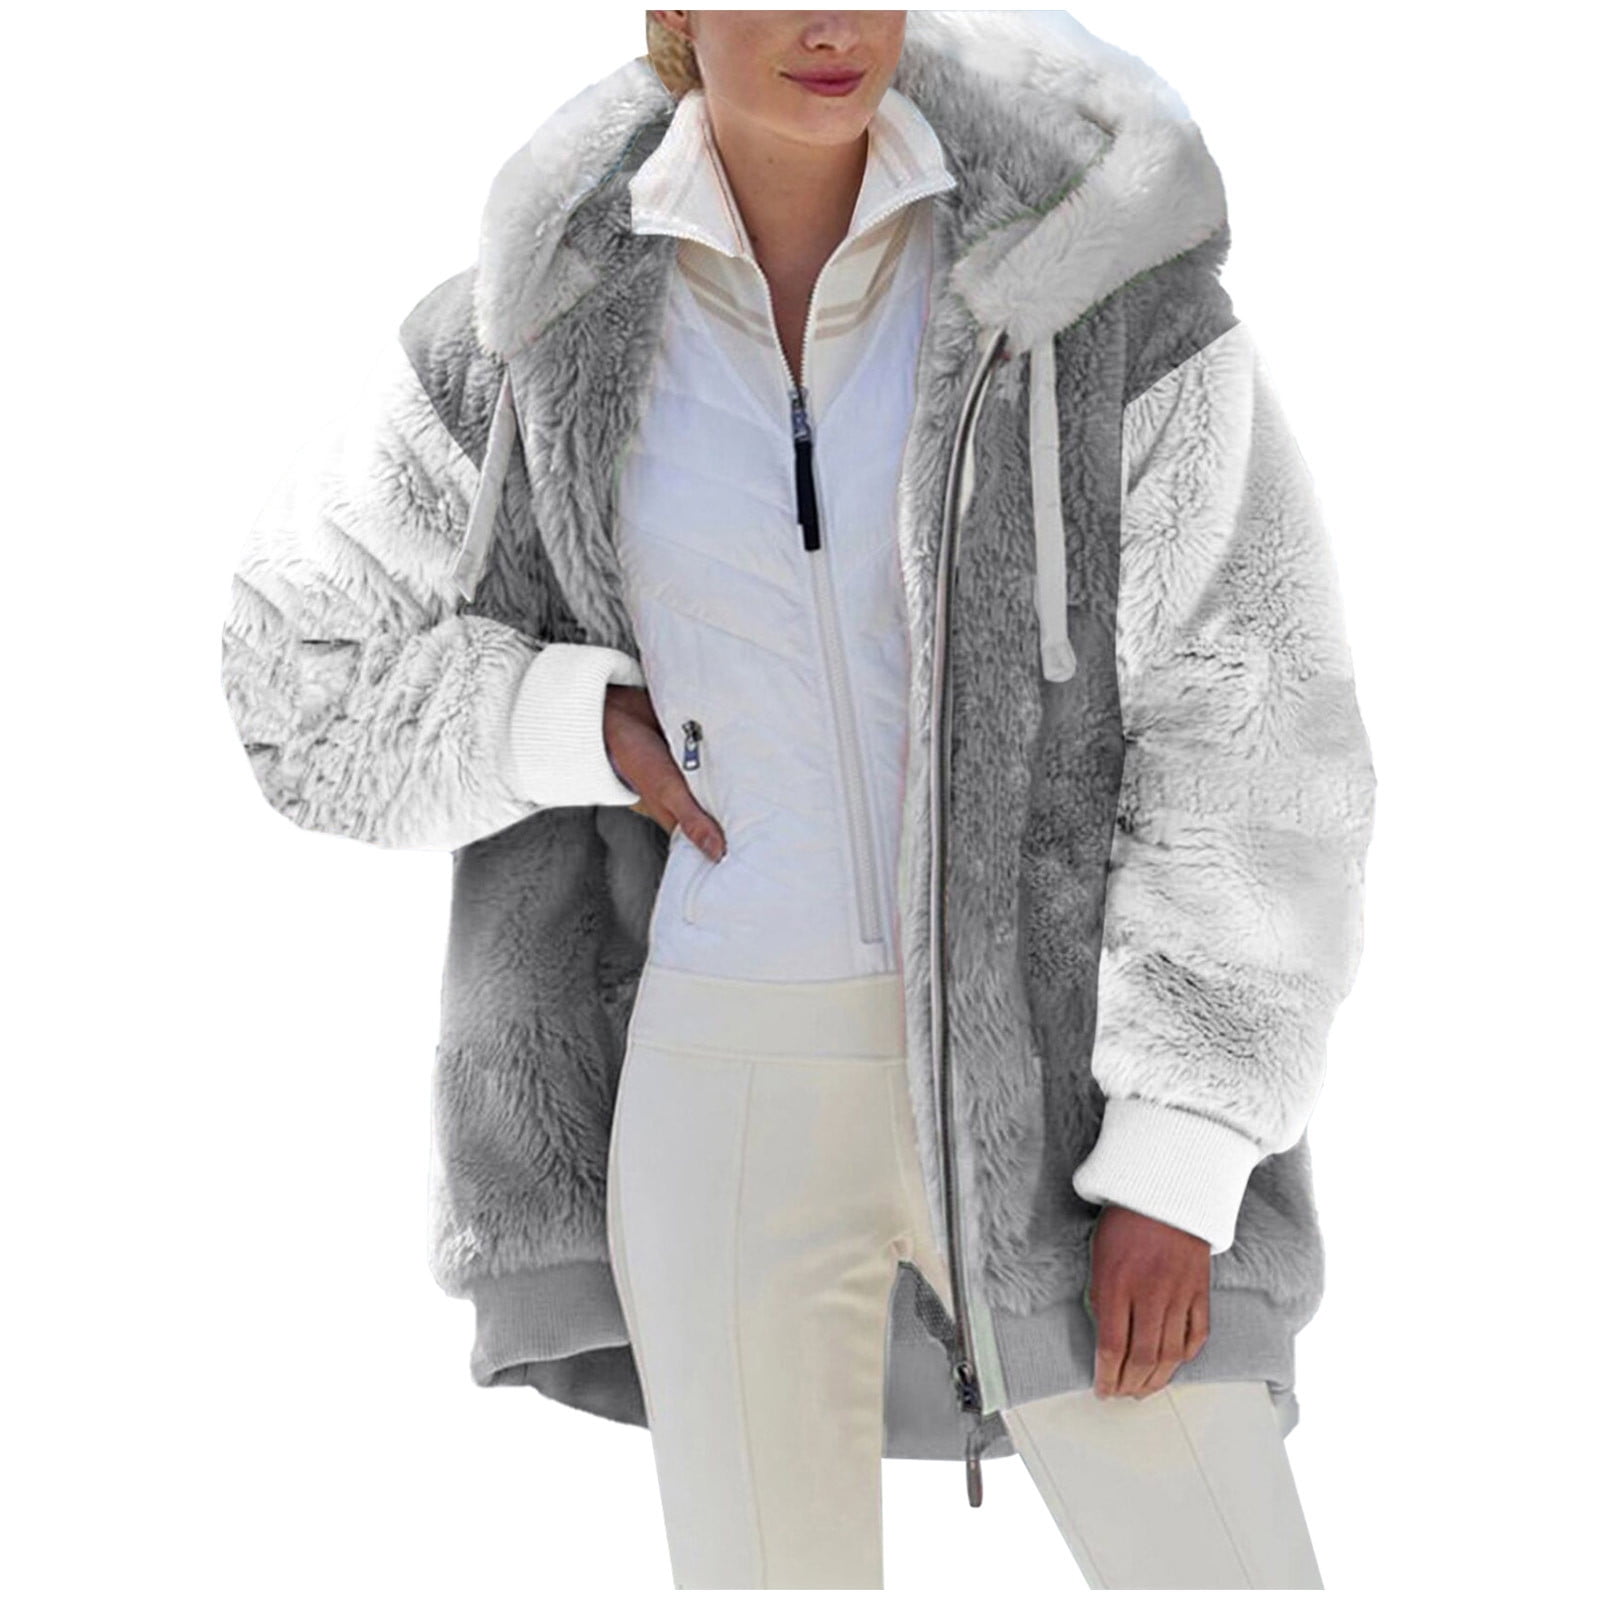 Winter Coats for Women Fashion Plus Size Extreme Cold Weather Outwear ...